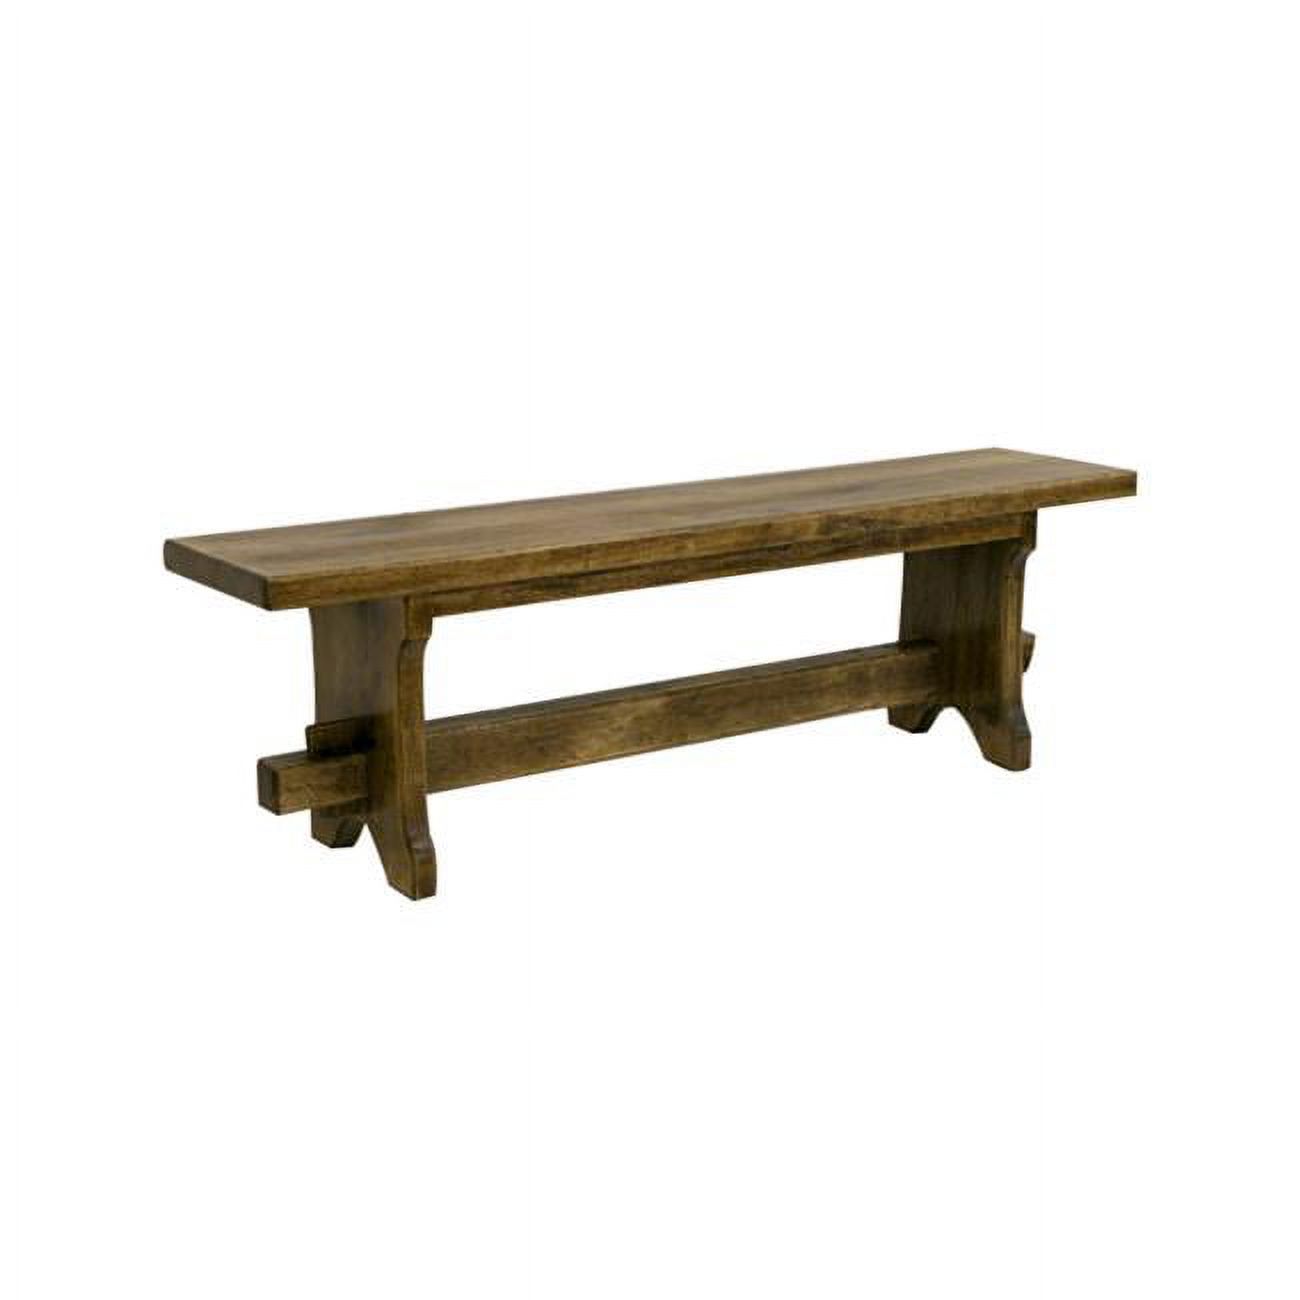 Artesano Iron Works FWB0001 Bench 54-in W Reclaimed Wood - image 1 of 6